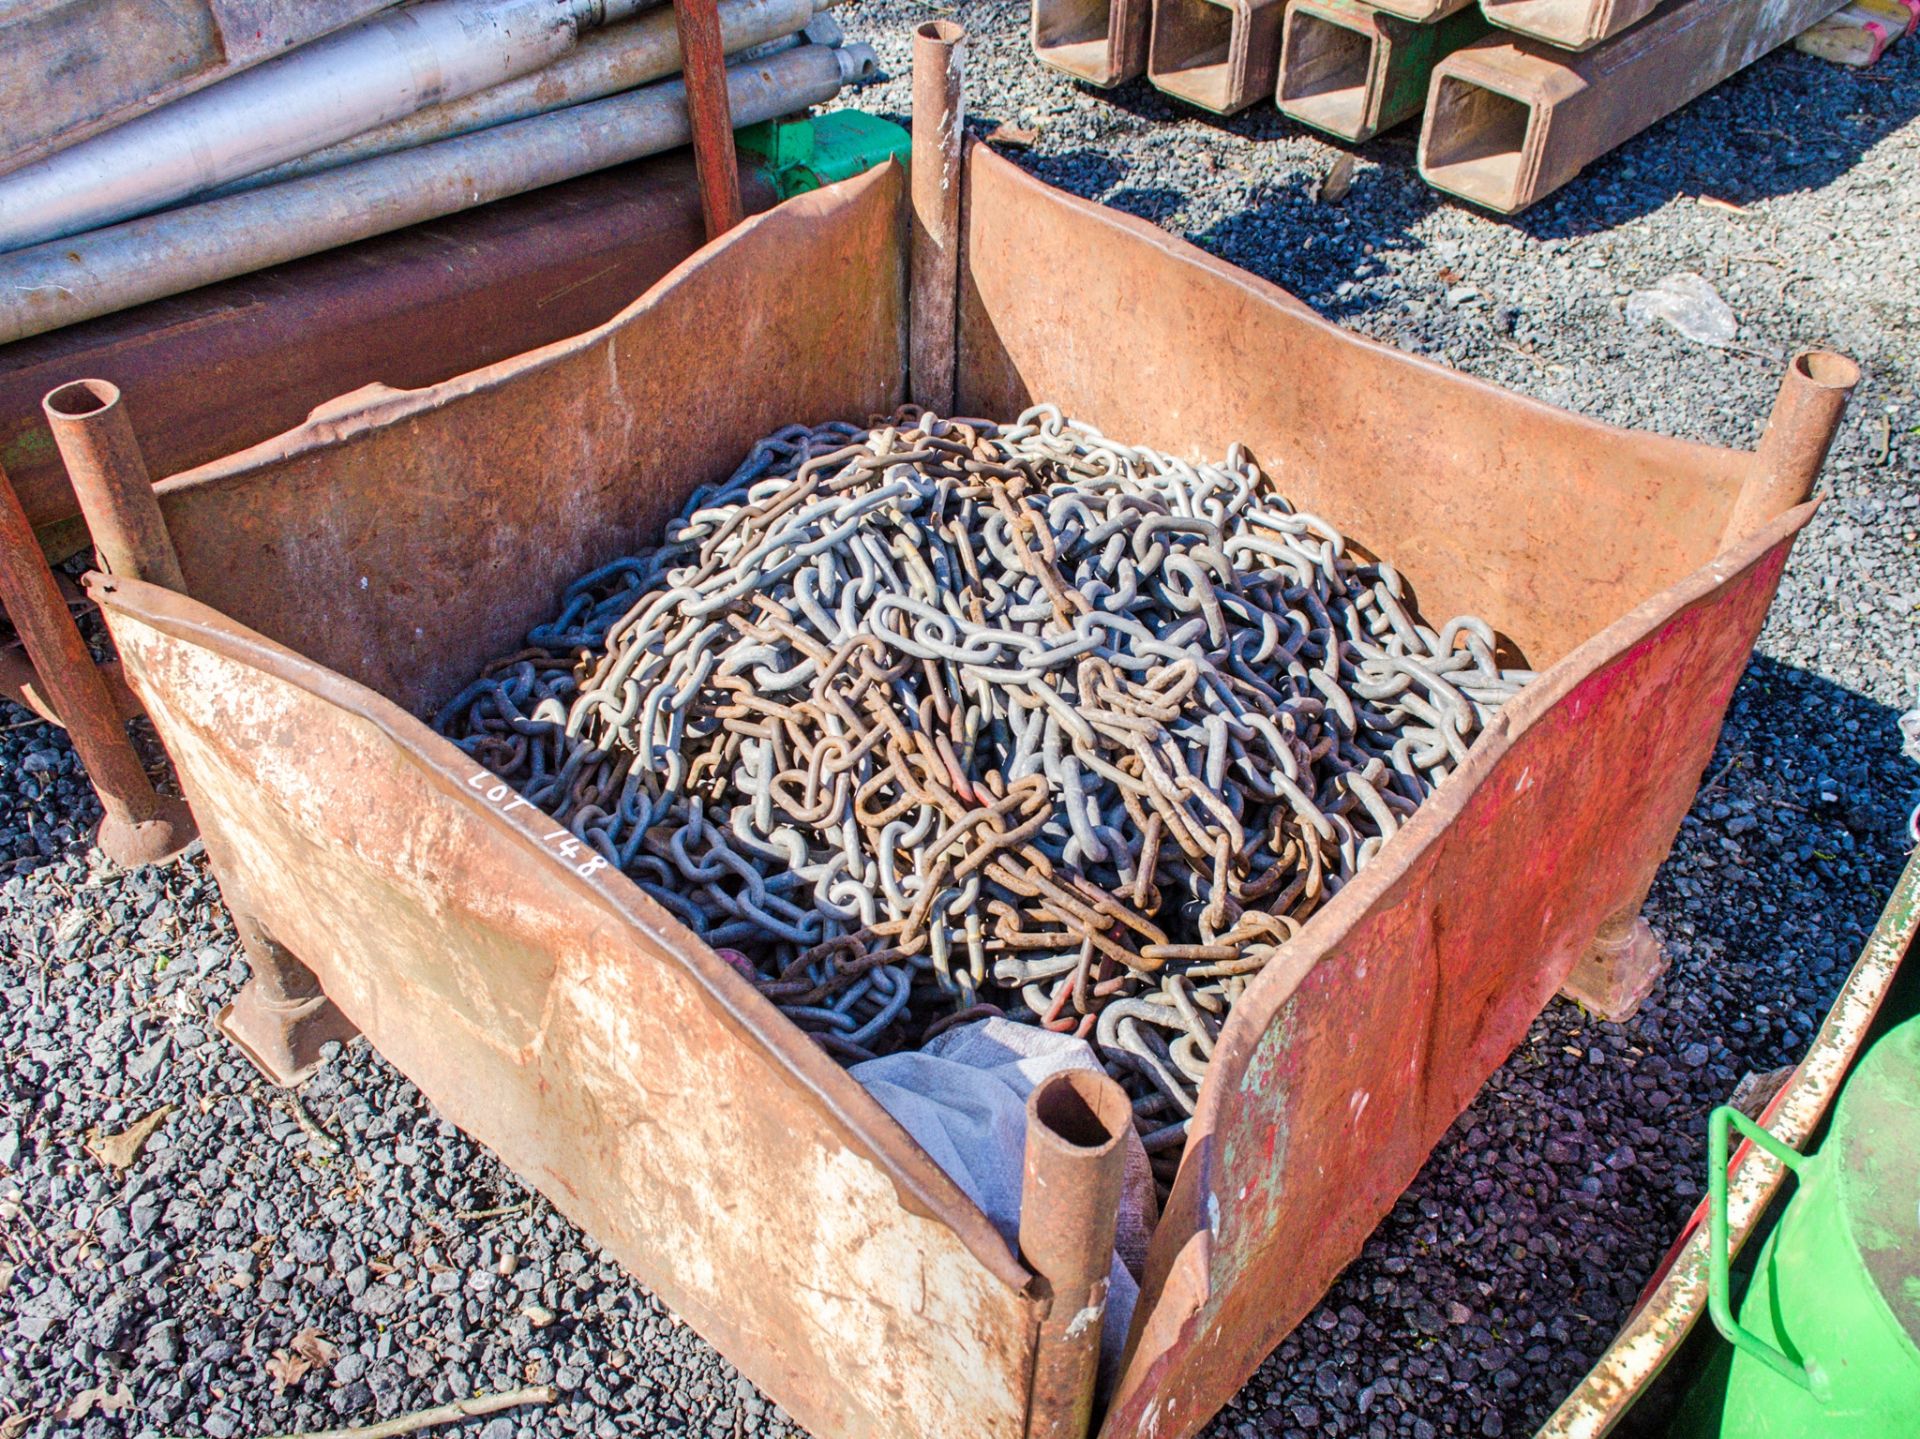 Stillage of chain & bag of chain snags